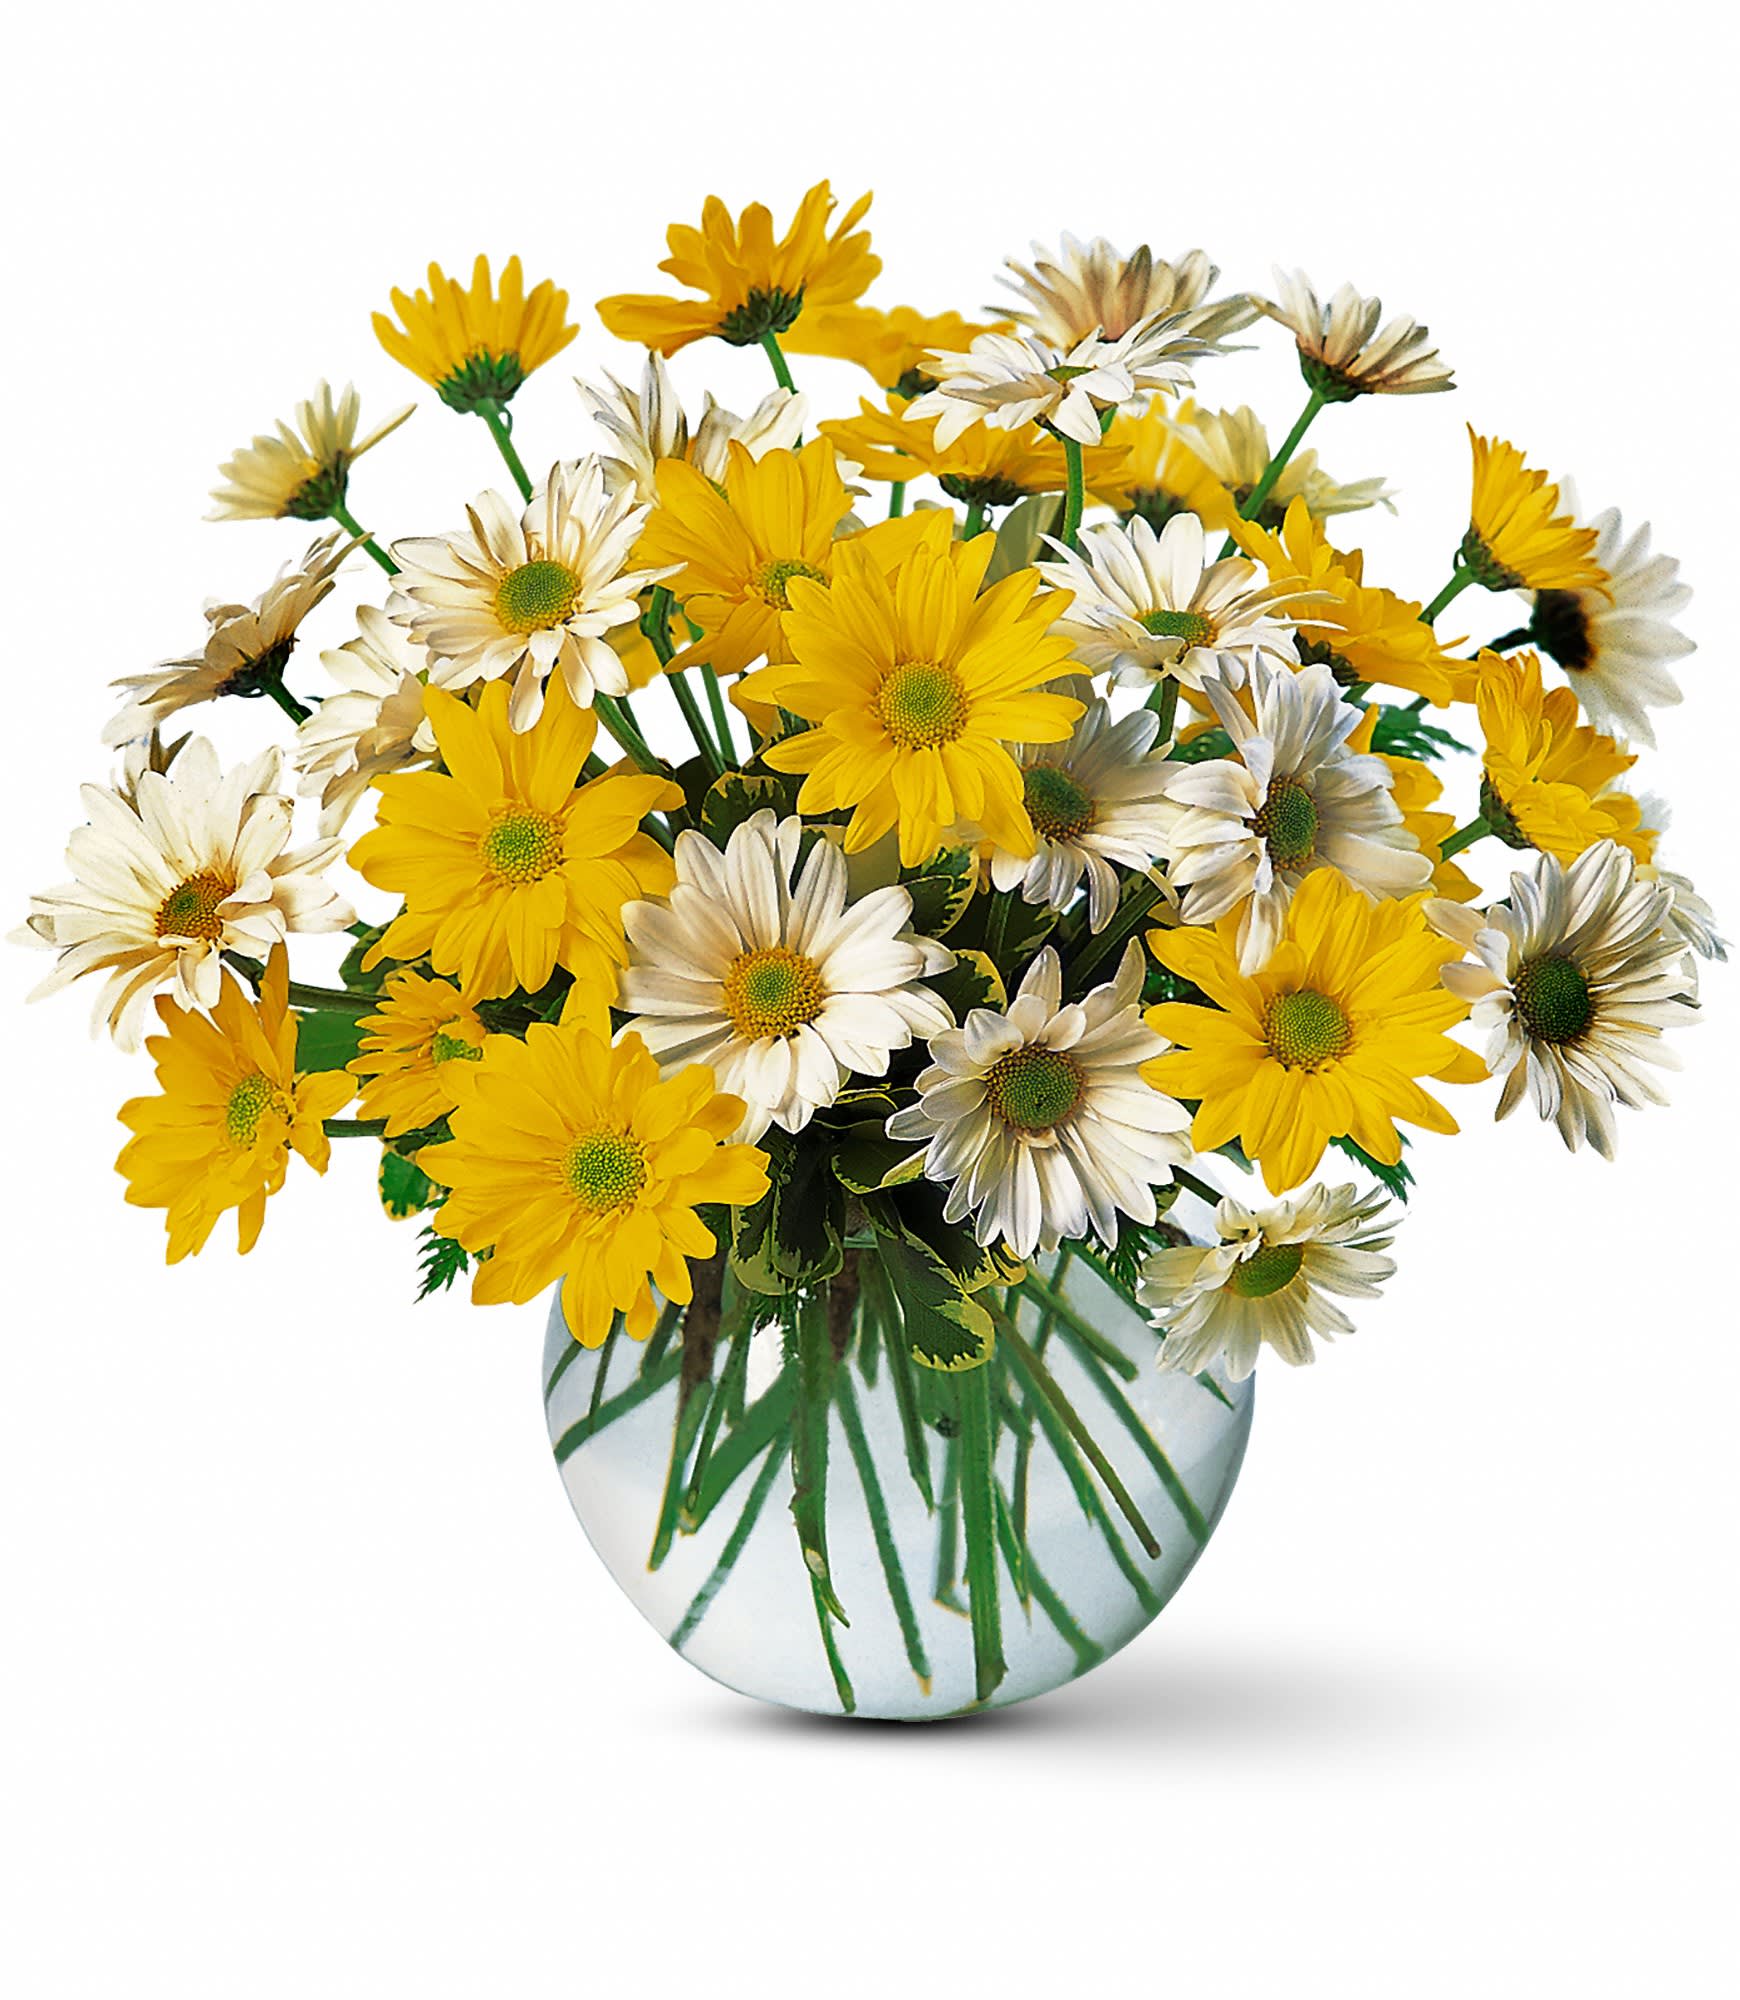 Dashing Daisies by Teleflora - Send these bright and joyful daisies and that special someone's heart will skip a beat or two.